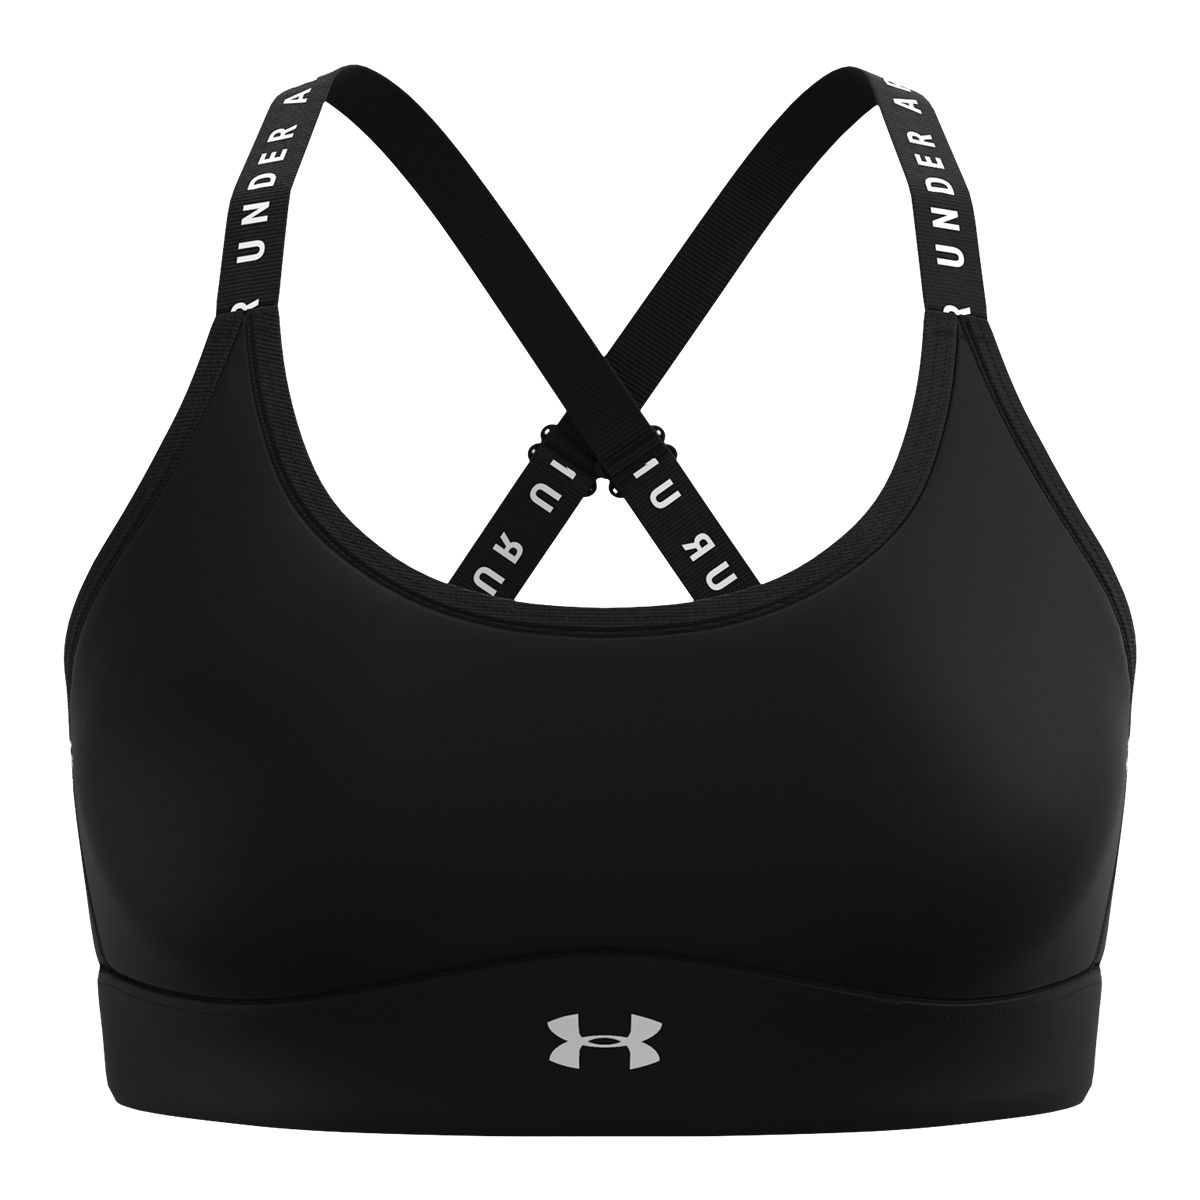 Women's - Long Sleeves or Sport Bras or Equipment or Cleats and